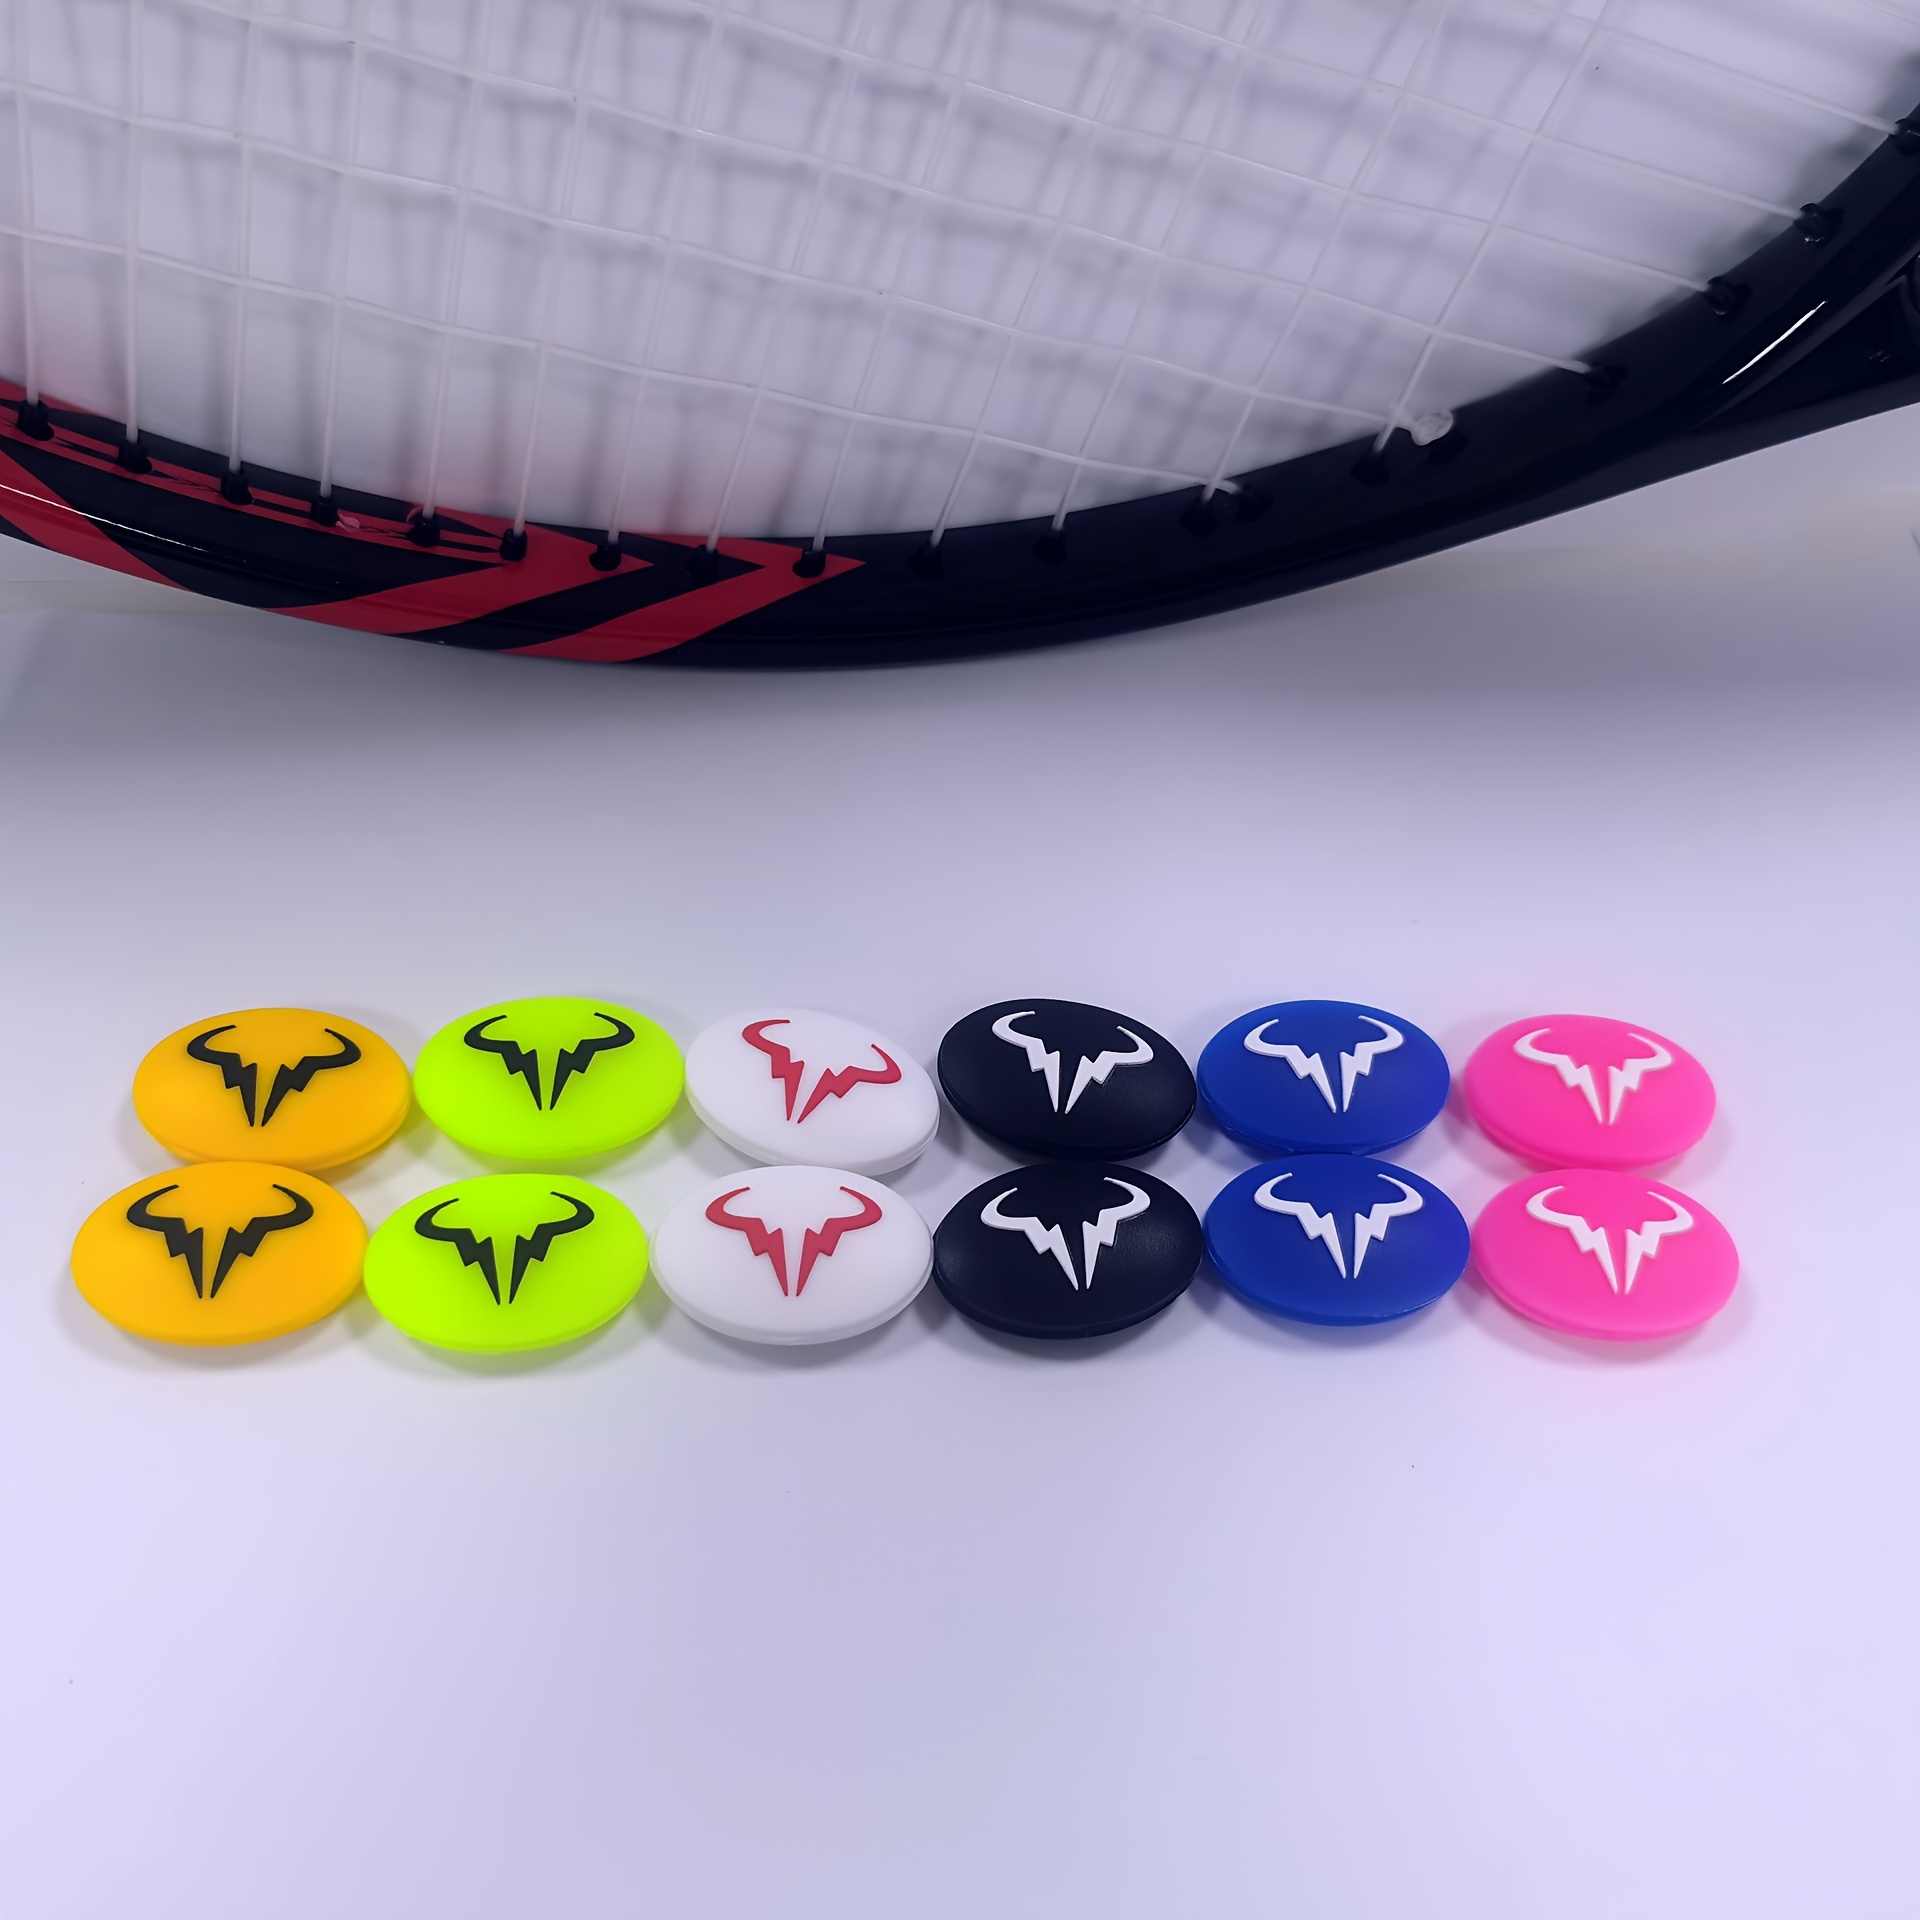 

4pcs Tennis Vibration Dampener, Silicone Racket Shock Absorbers Great For Tennis Players, Outdoor Sports Accessories